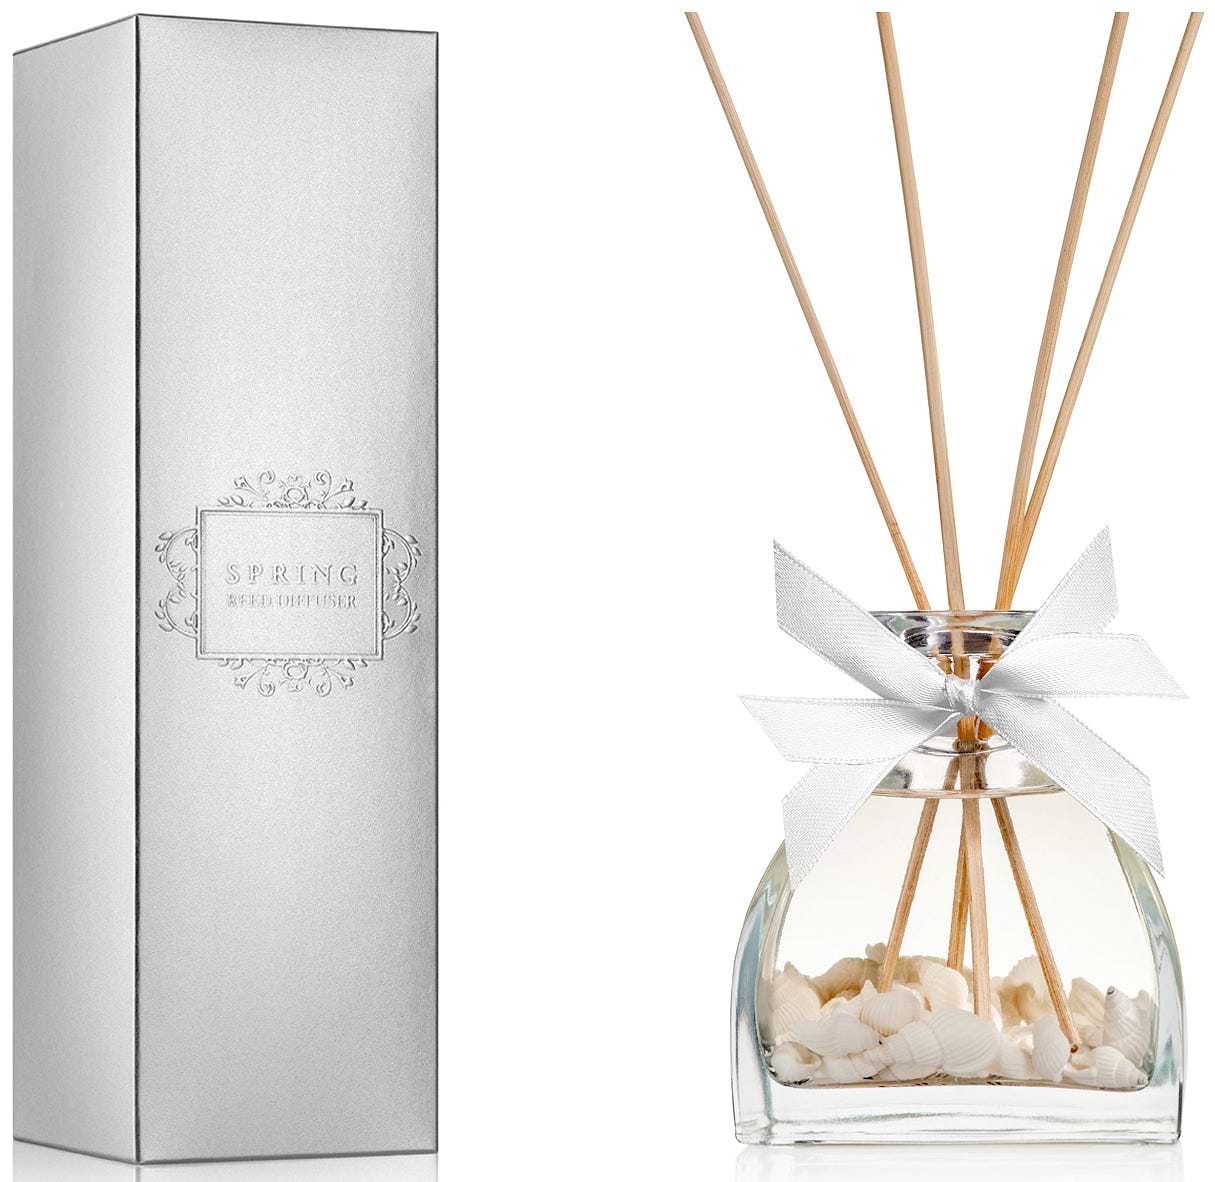 Shop Aromatherapy Diffusers – The Gift of Scent